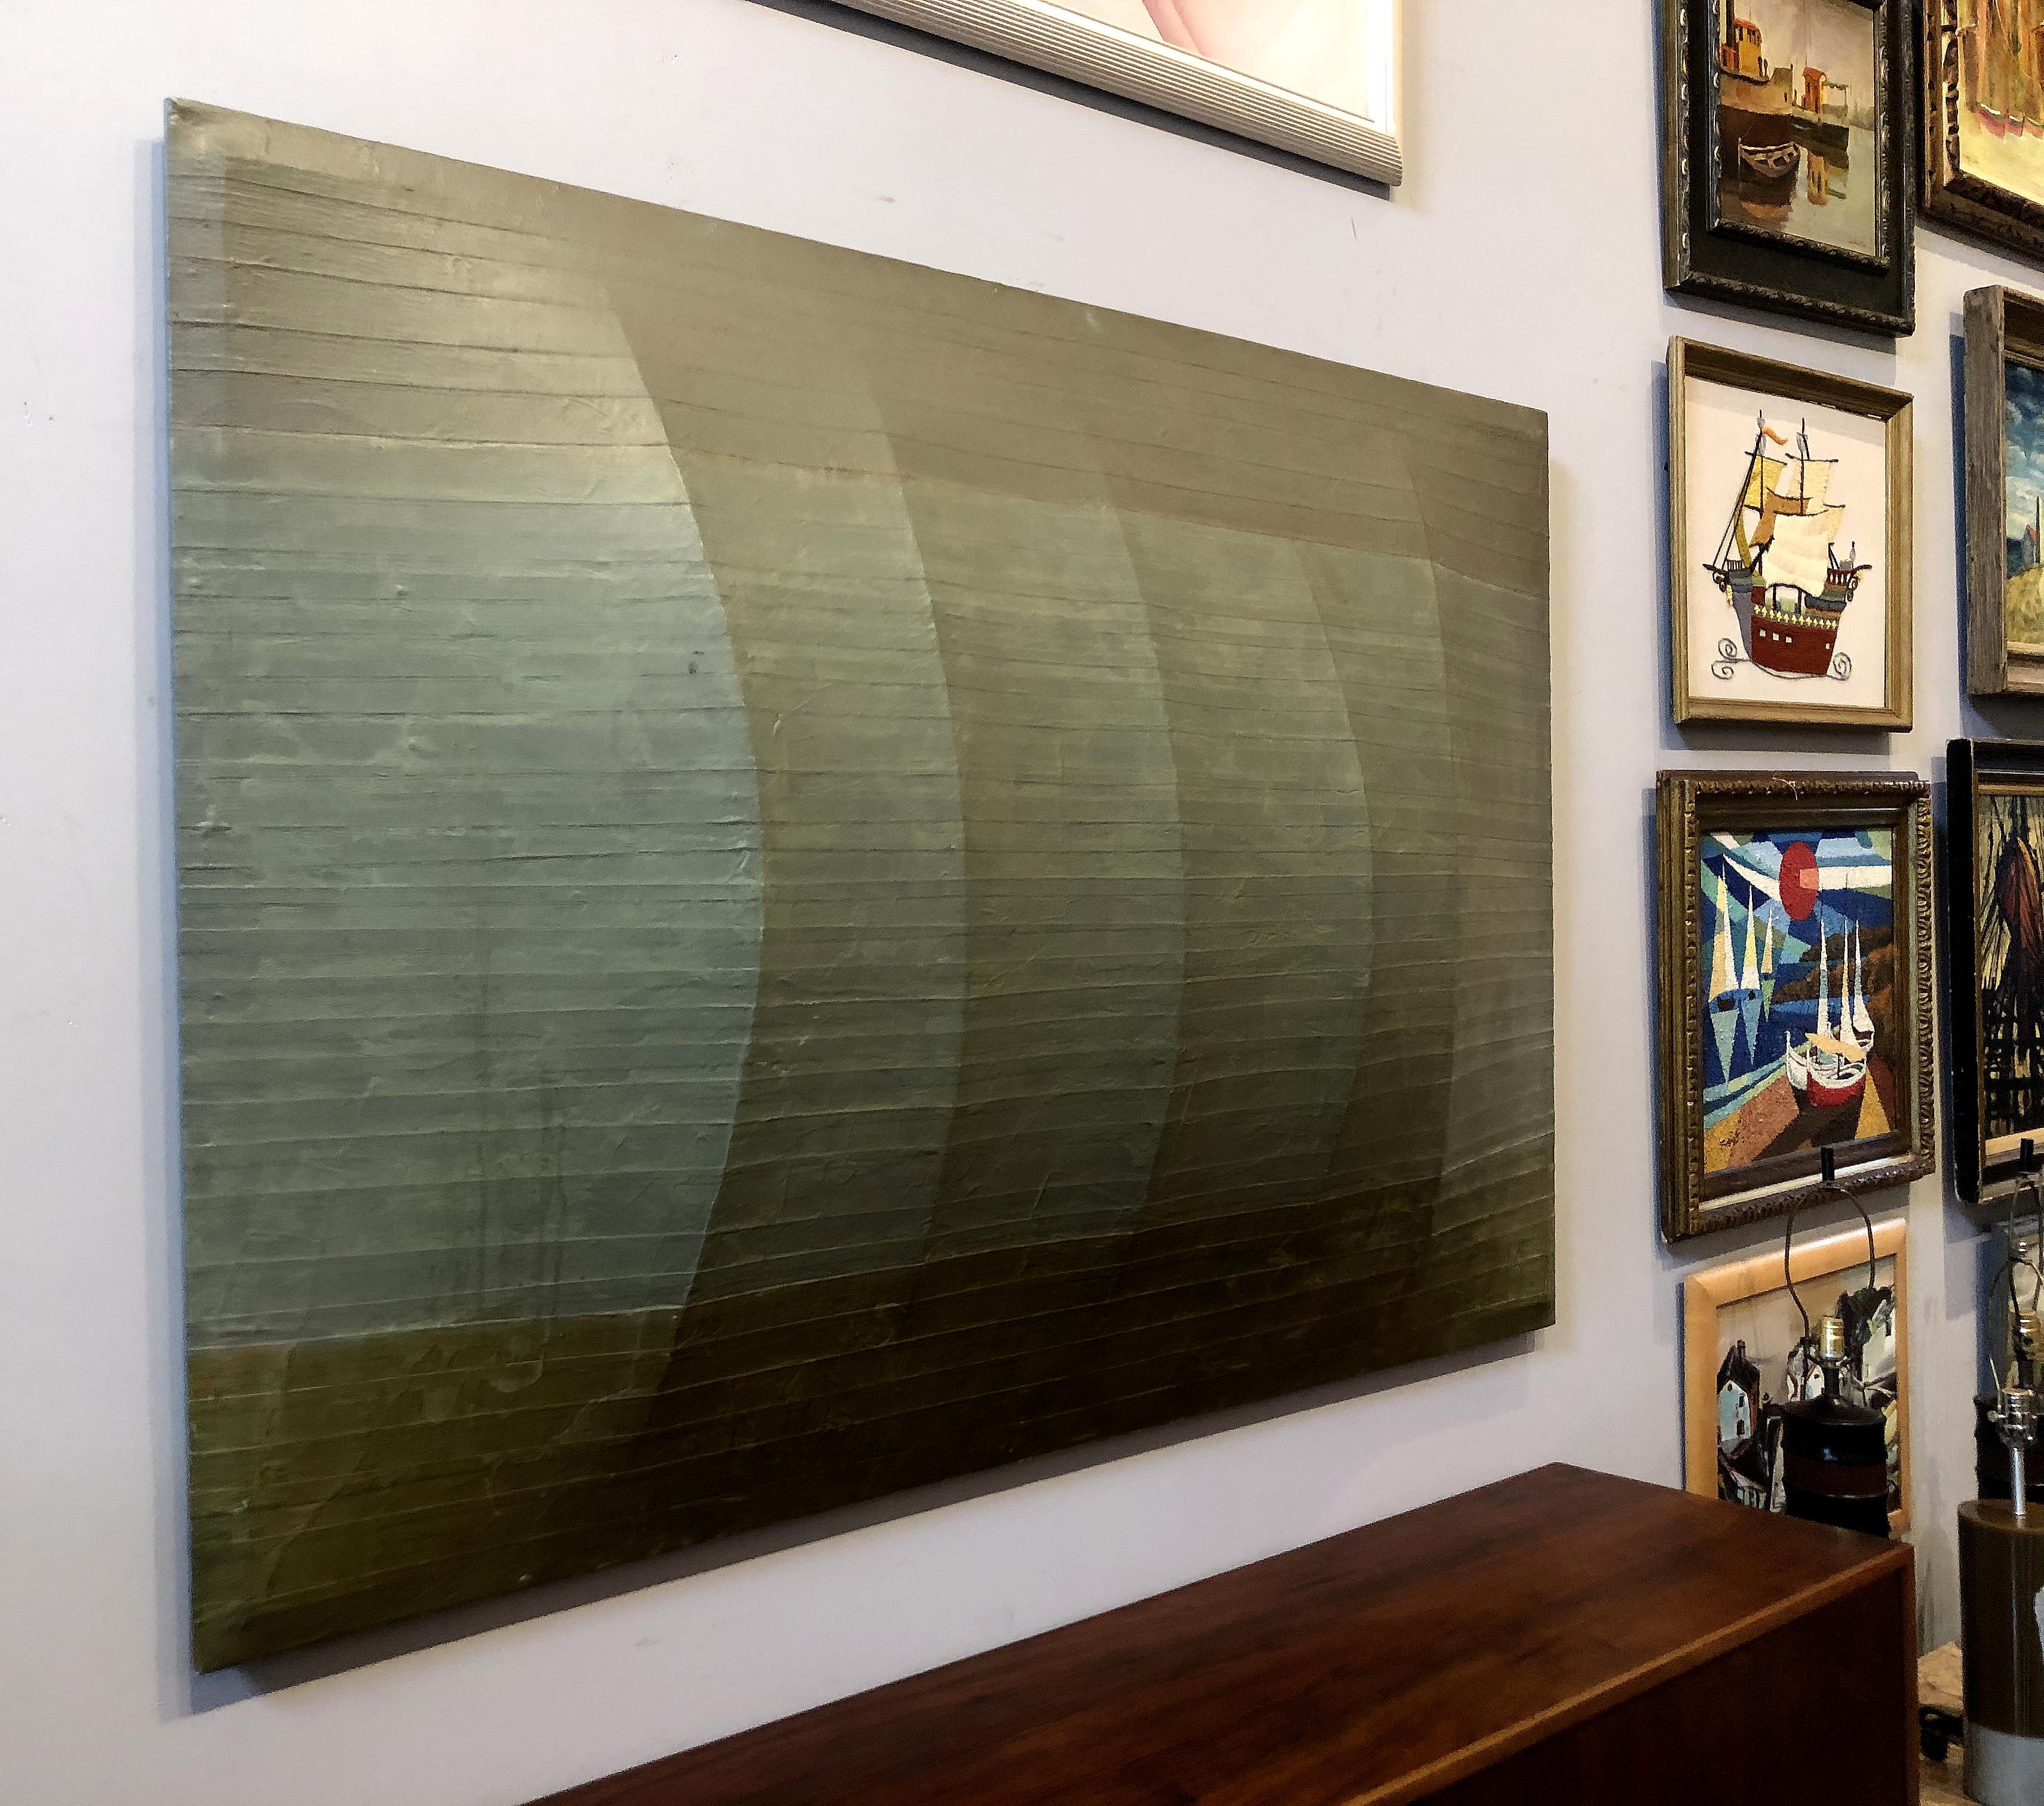 Mid-Century Modern 3-Dimensional Painting Attributed to Charles Hinman, Monumental 1960s Work